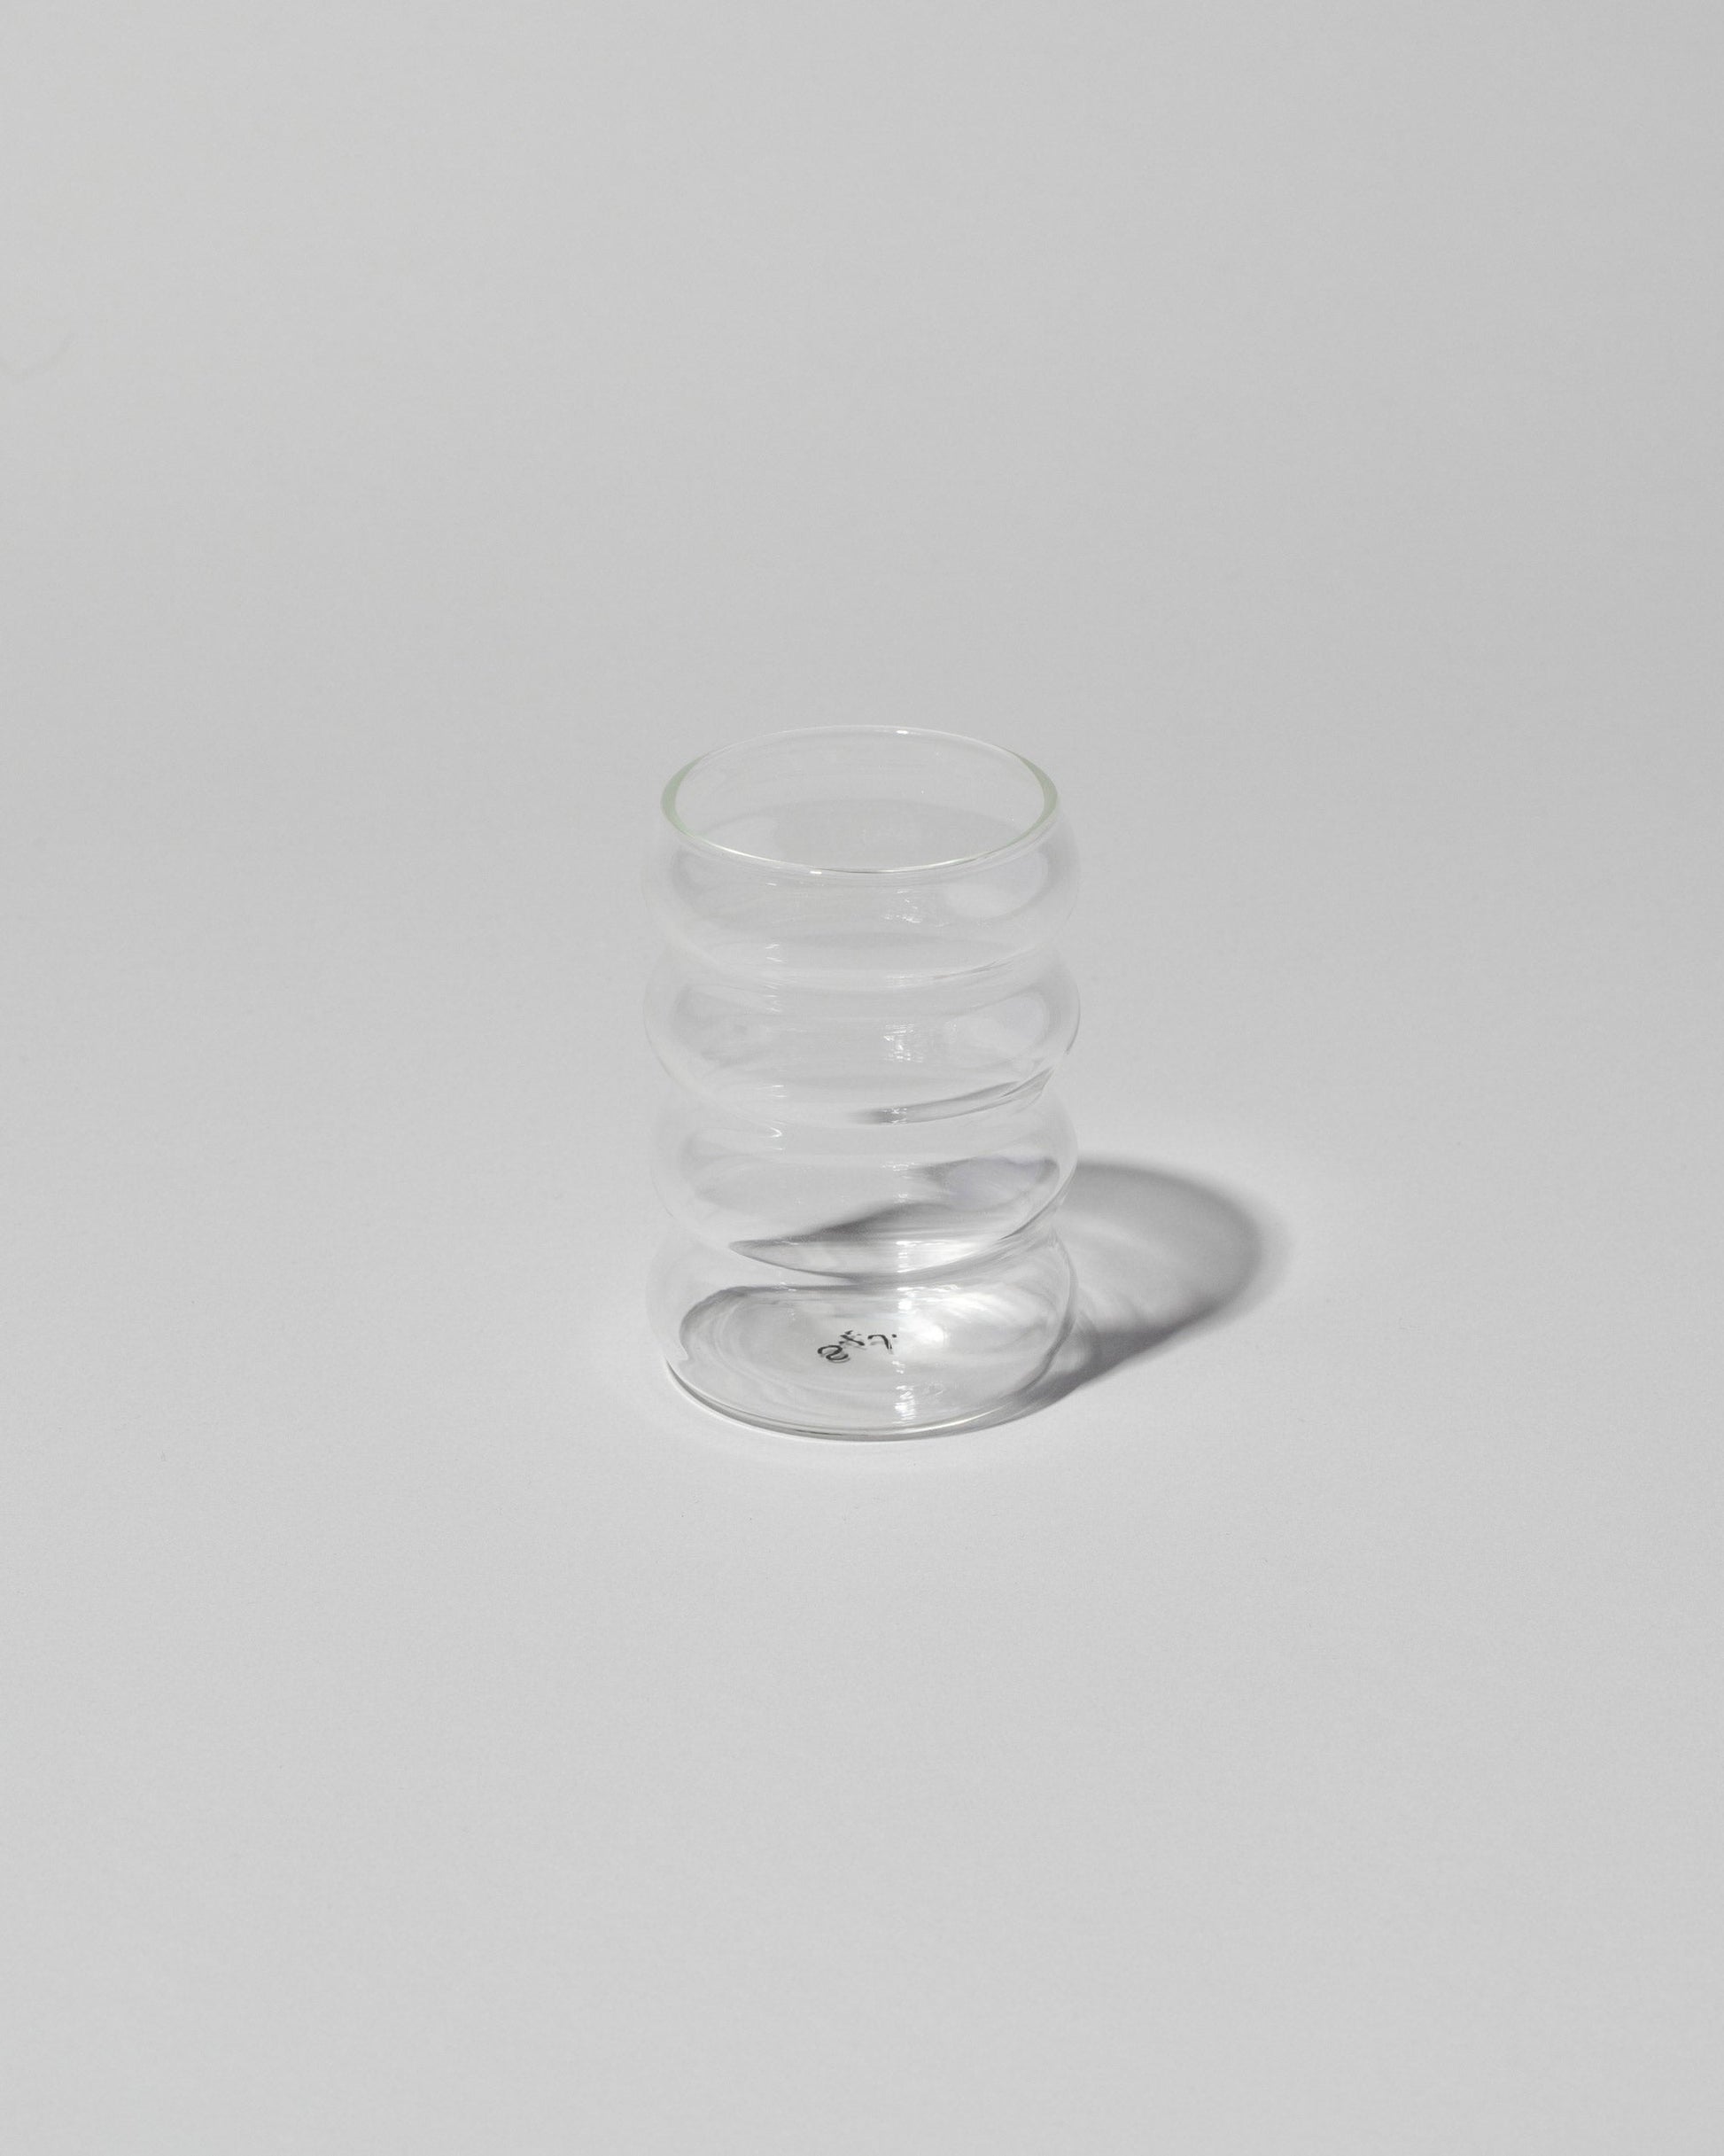 Sophie Lou Jacobsen Small Clear Single Ripple Cup on light color background.